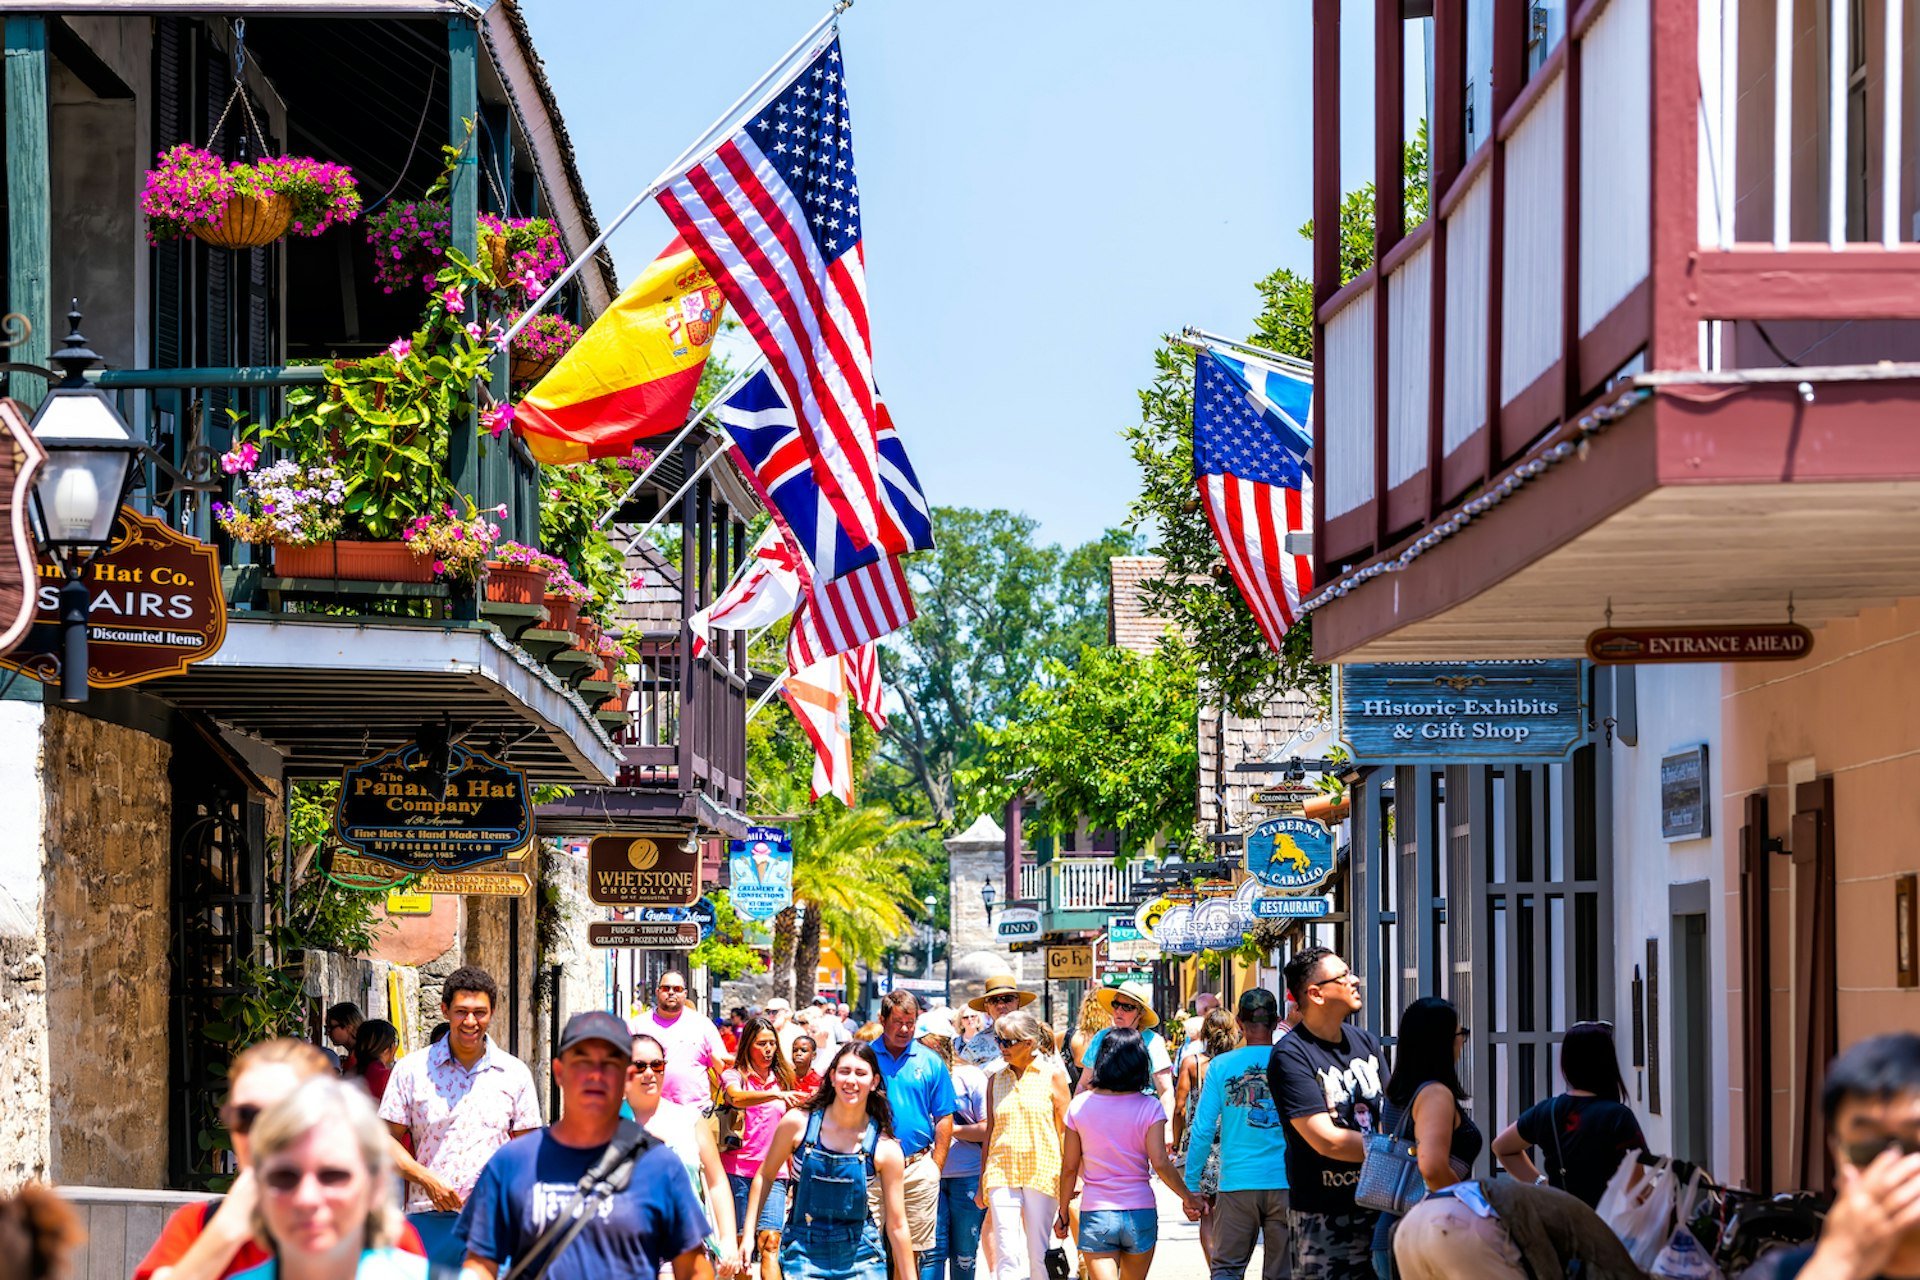 People shopping on St George St by stores, shops and restaurants American and international flags, St Augustine, Florida, USA